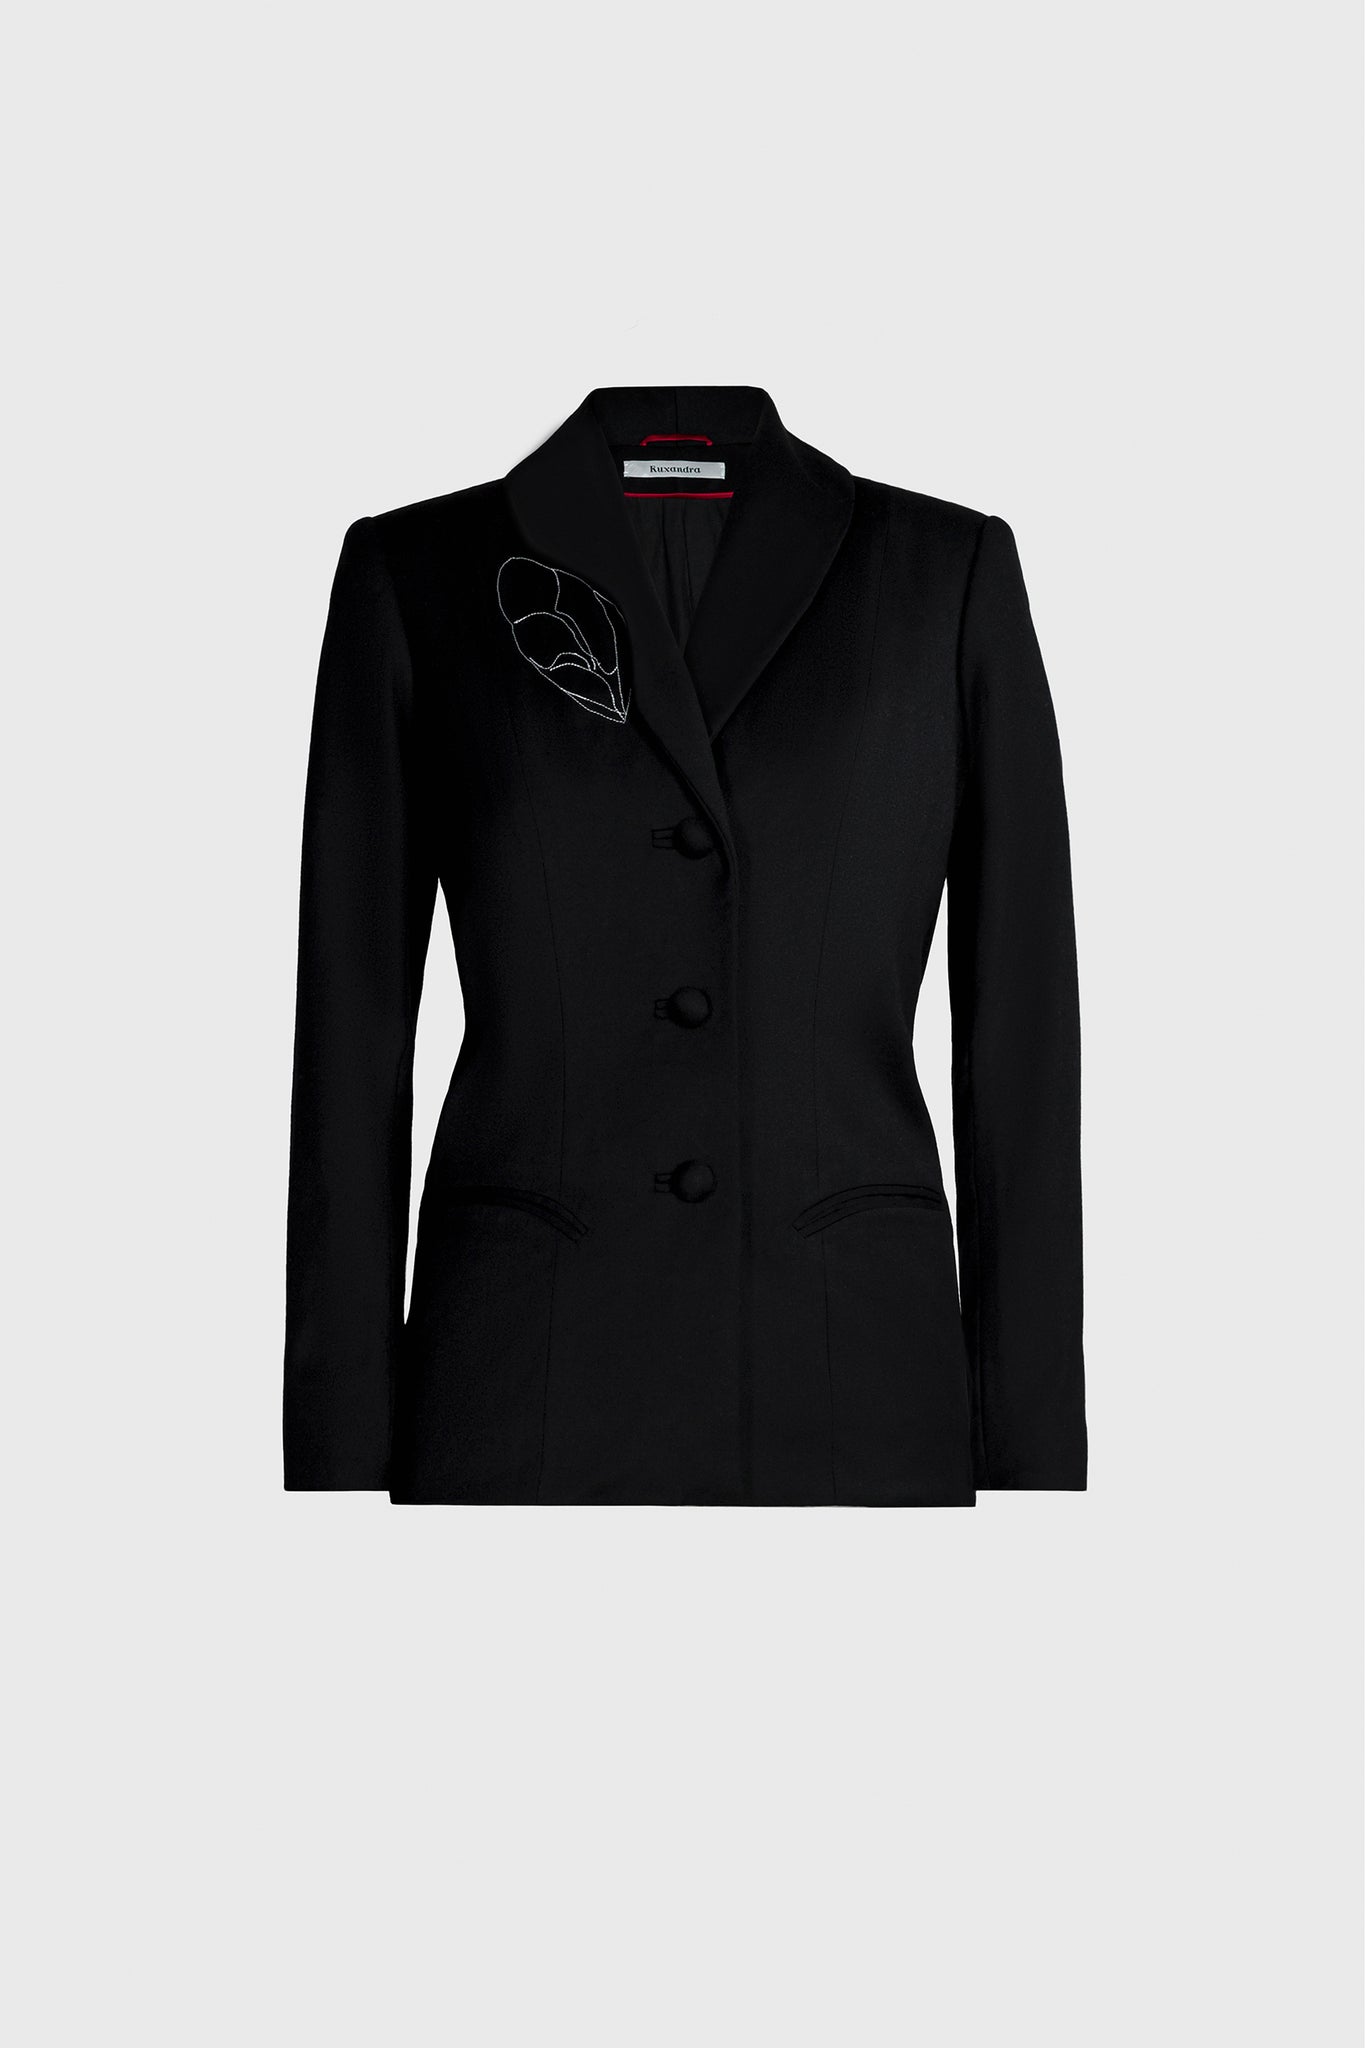 Ruxandra, long tailored jacket, cut out lapel around a manual thread embroidery, cocoon shell, white thread contrasting the jet black, curved sleeves, medieval cut, armor like silhouette, elegant edgy style 